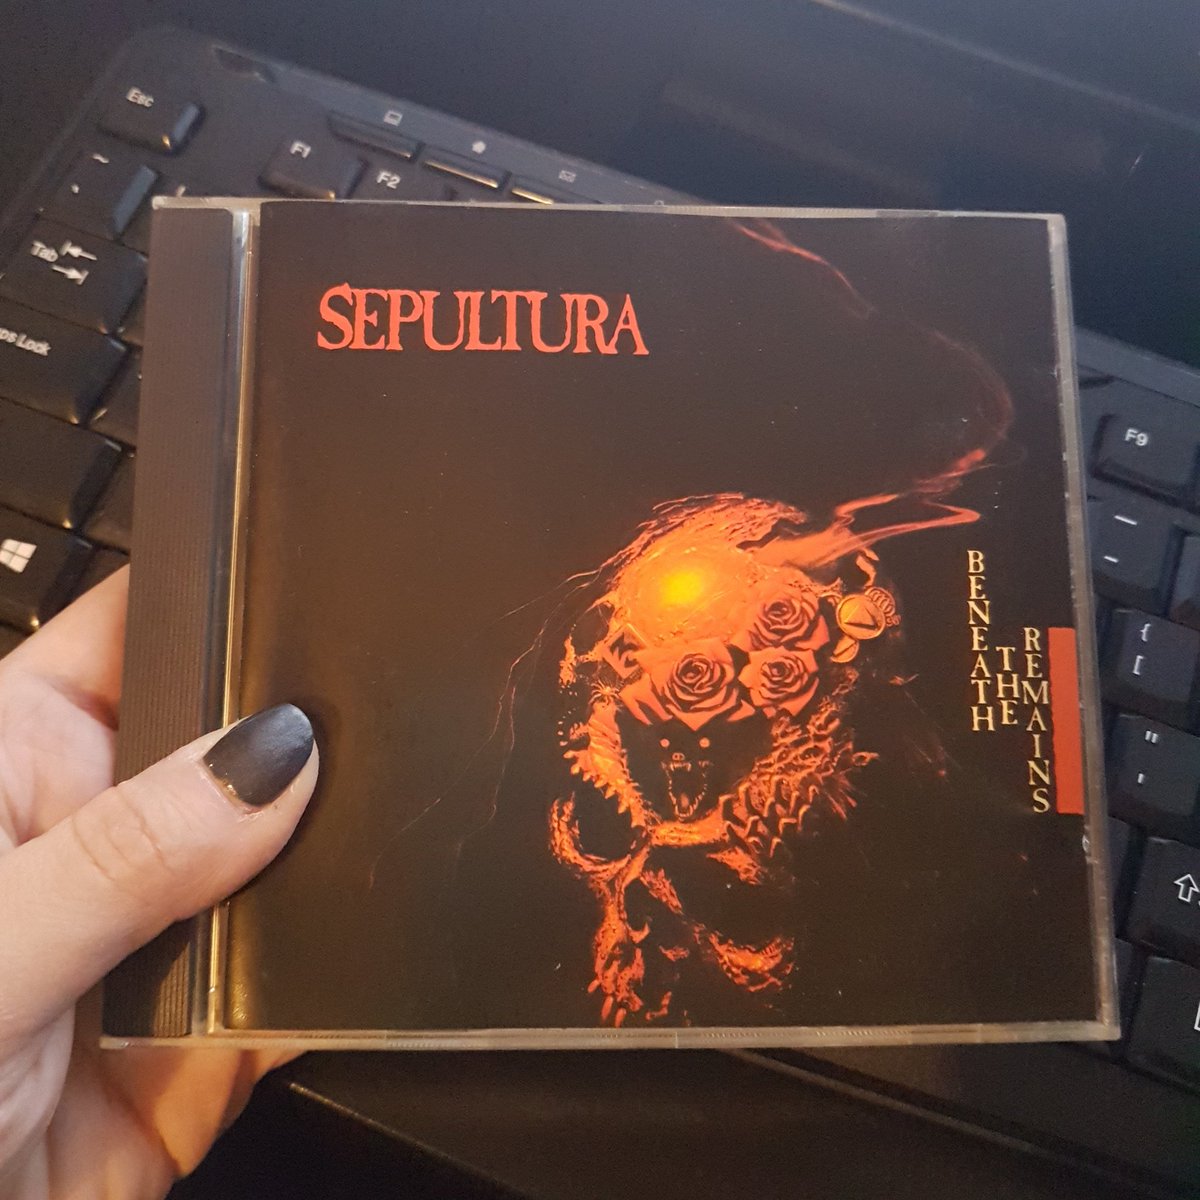 Now playing SEPULTURA Beneath The Remains! A landmark album, & near perfect IMO!👌My fav tracks: Inner Self, Beneath The Remains, Primitive Future & Lobotomy! Yours? #sepultura #beneaththeremains #thrashmetal #classicthrashmetal #oldschoolthrashmetal #metal #themetalheadbox